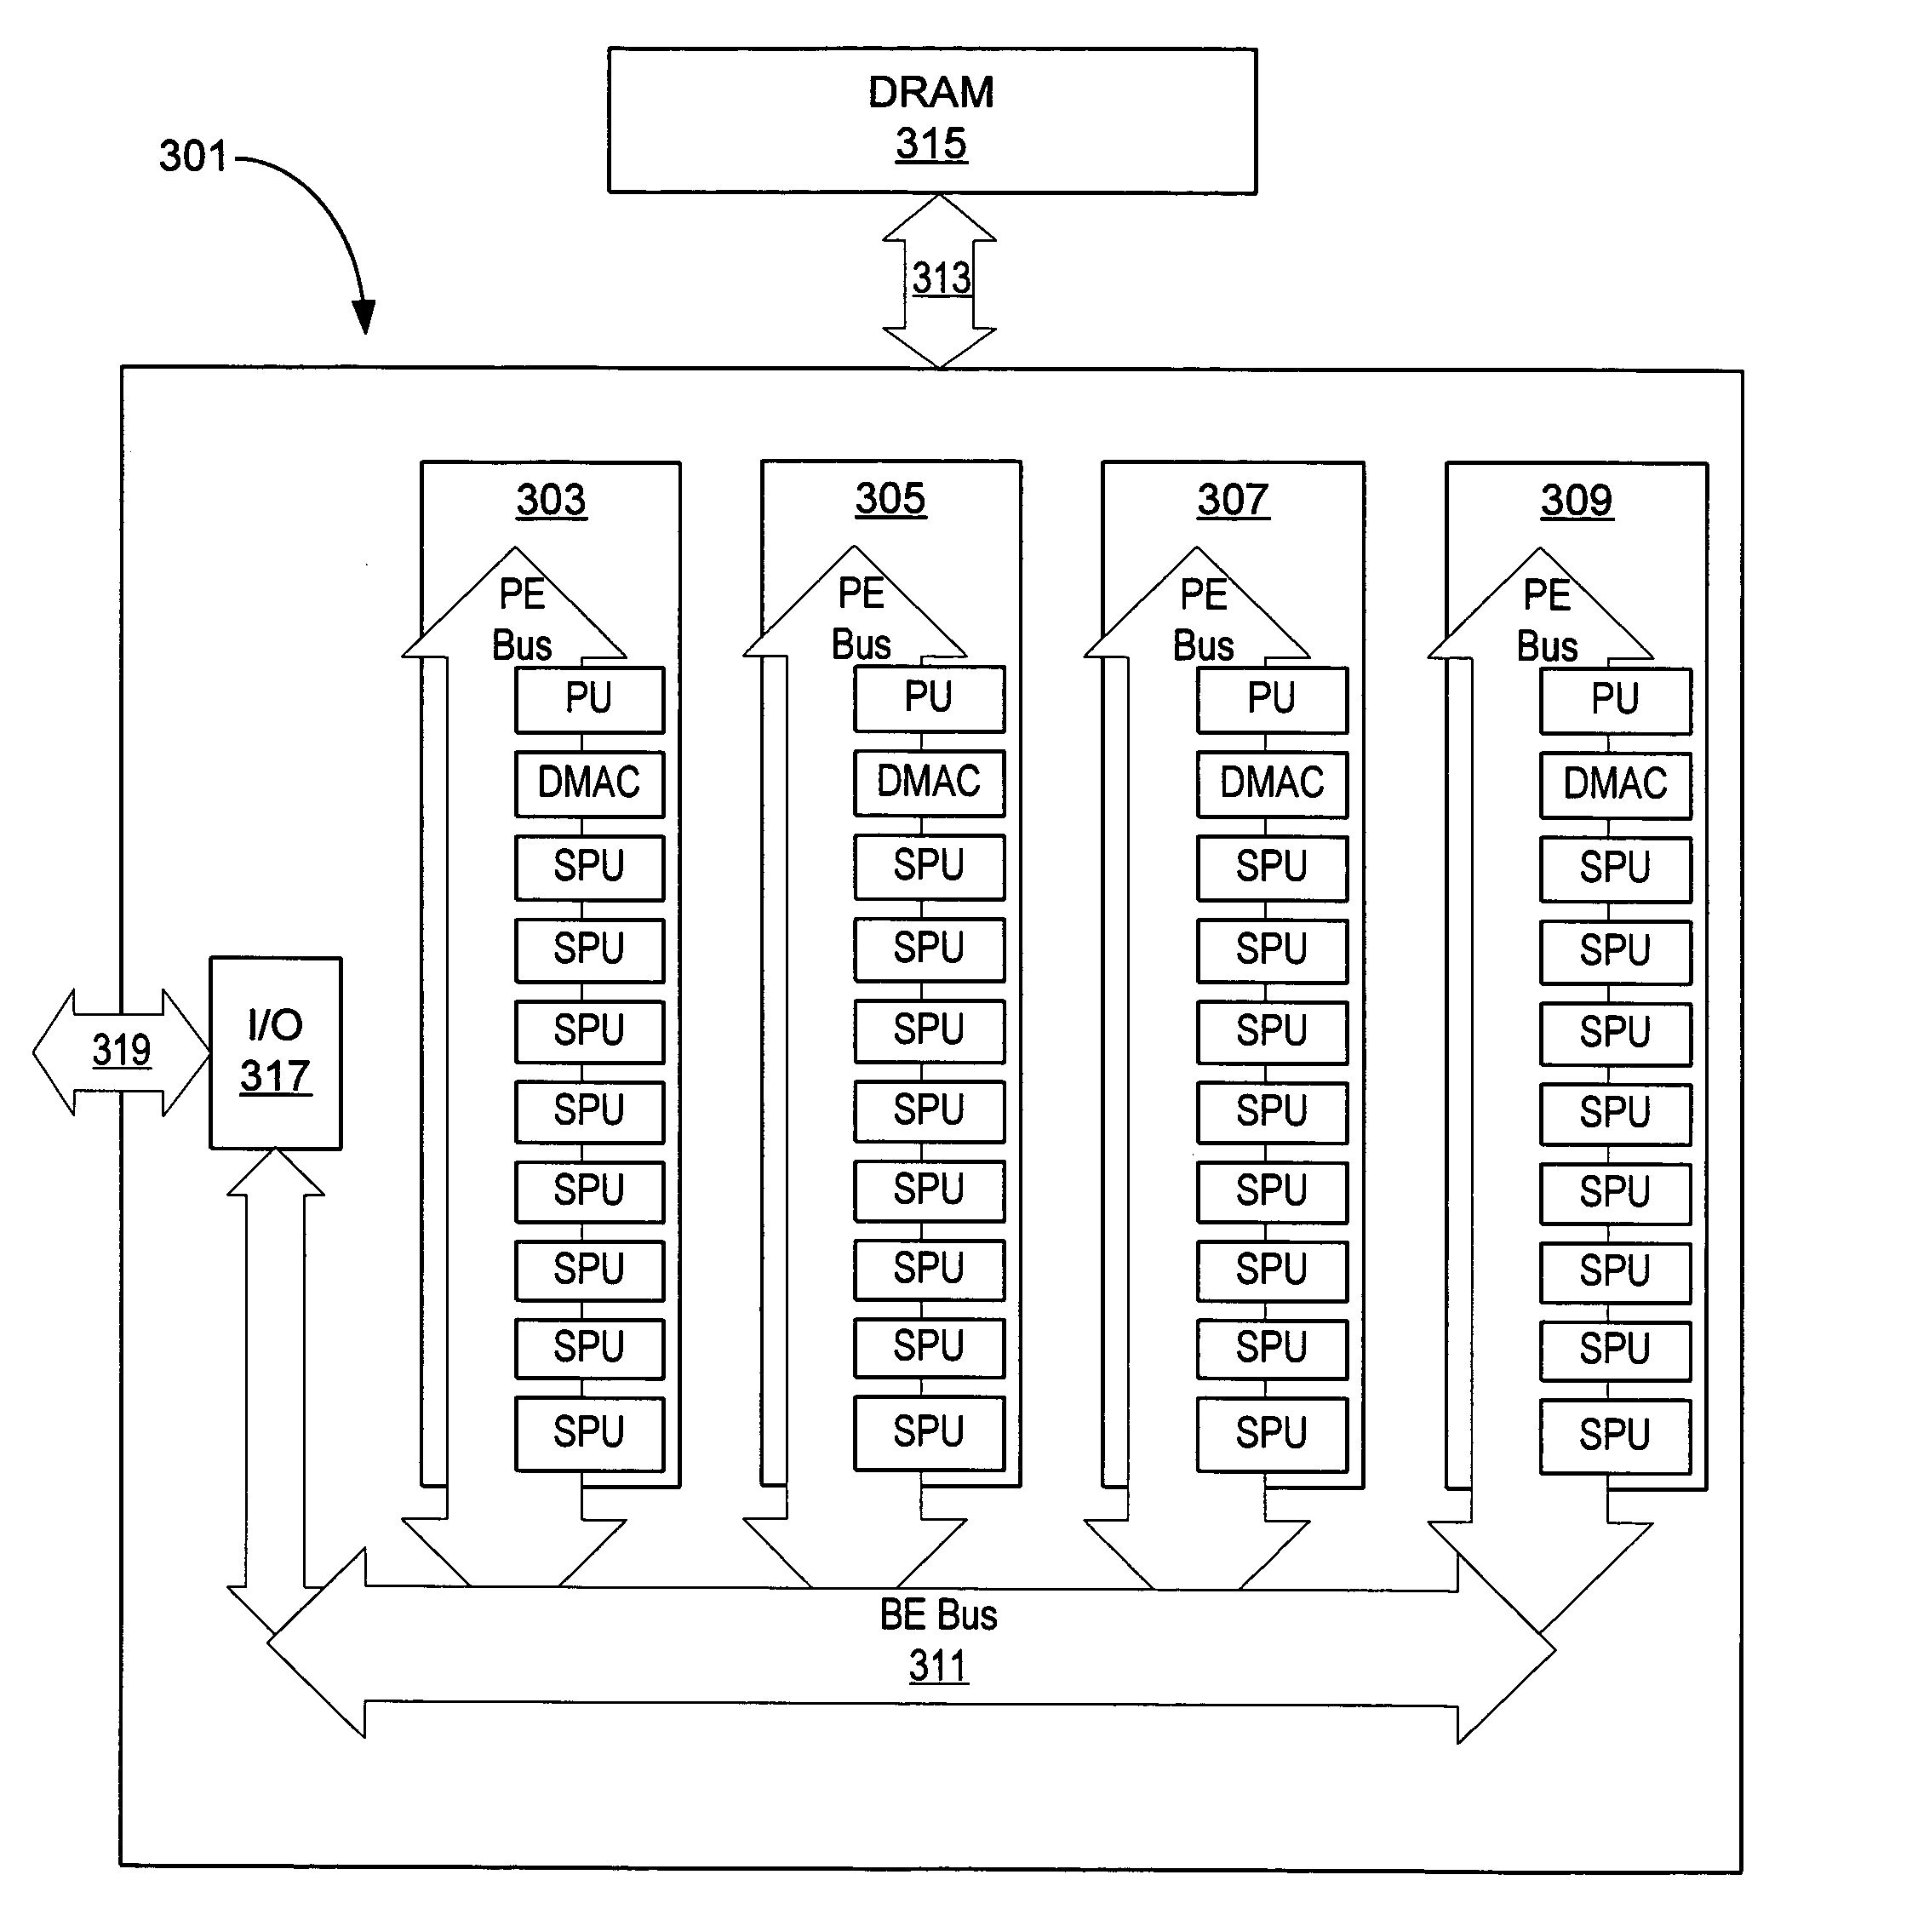 System and method for grouping processors